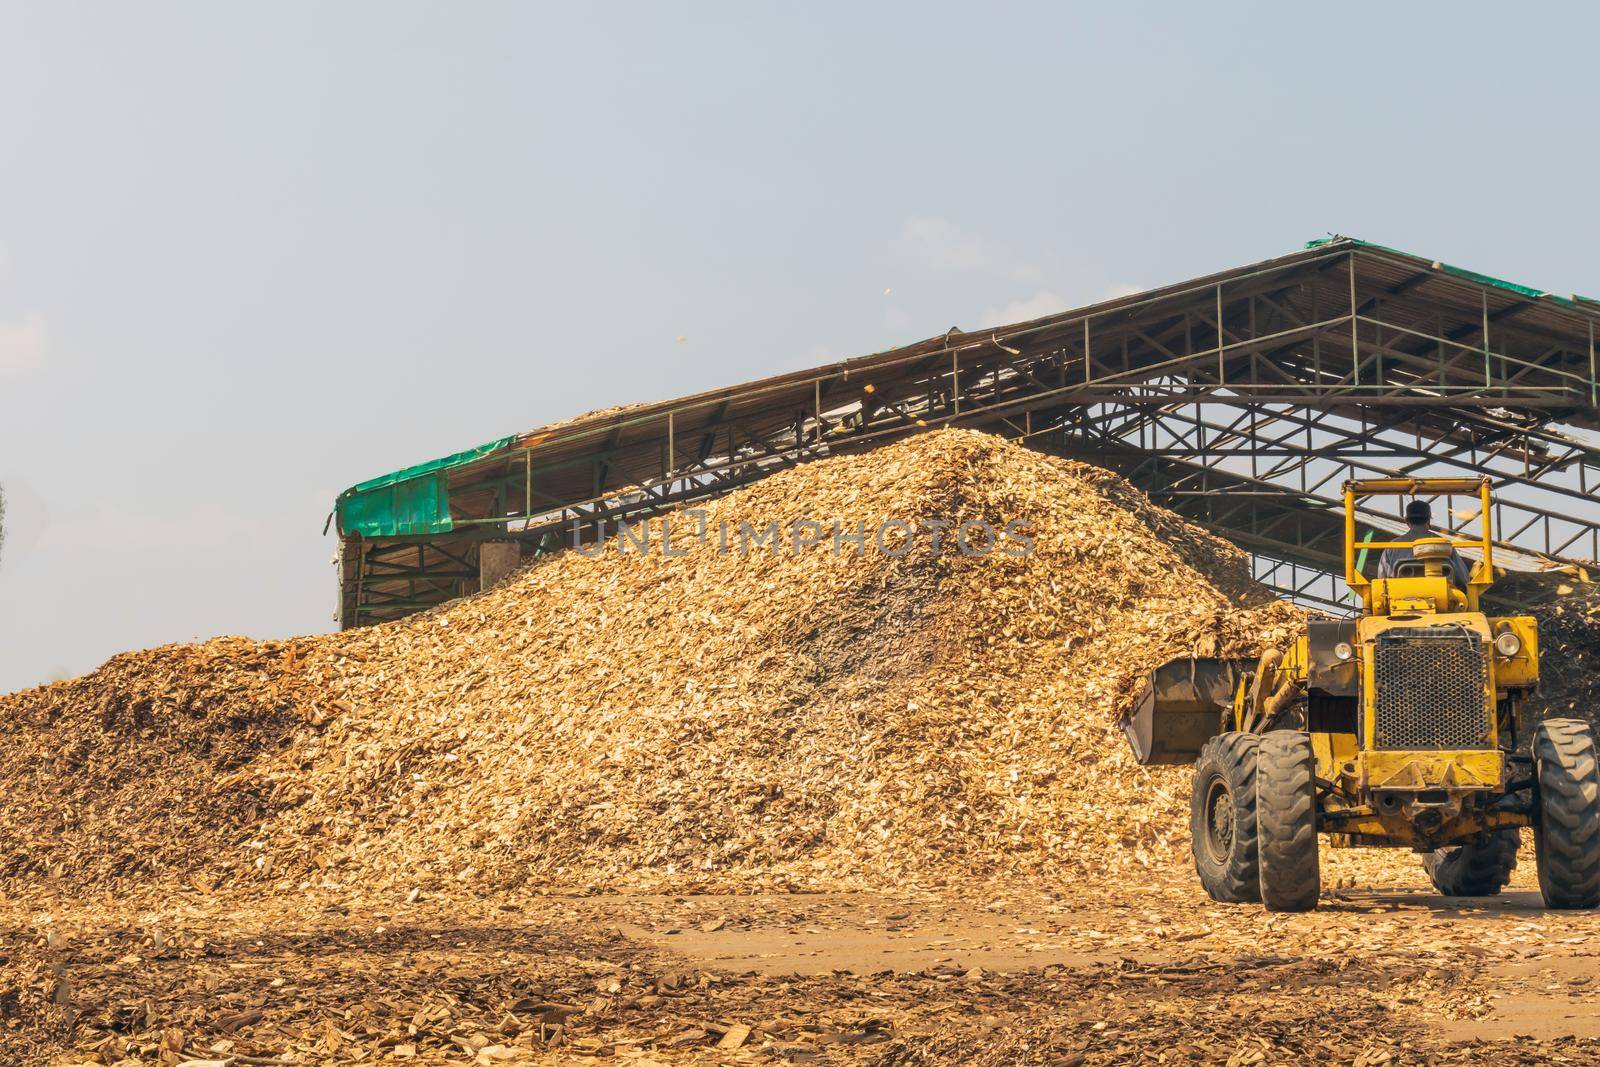 Employees are using forklifts to scoop up wood chips by suththisumdeang